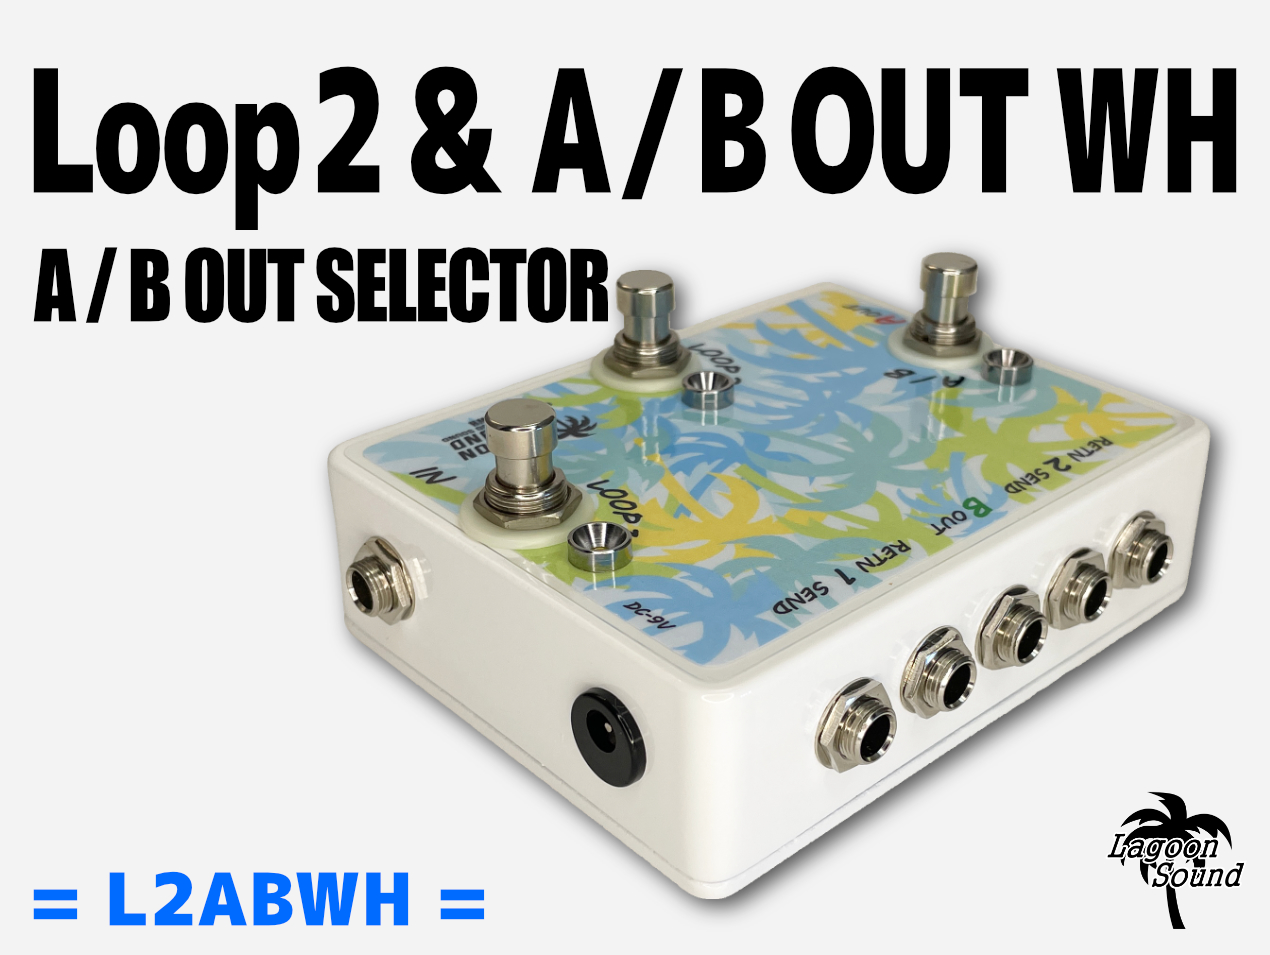 Loop 2 & A / B OUT SELECTOR White | LAGOON SOUND